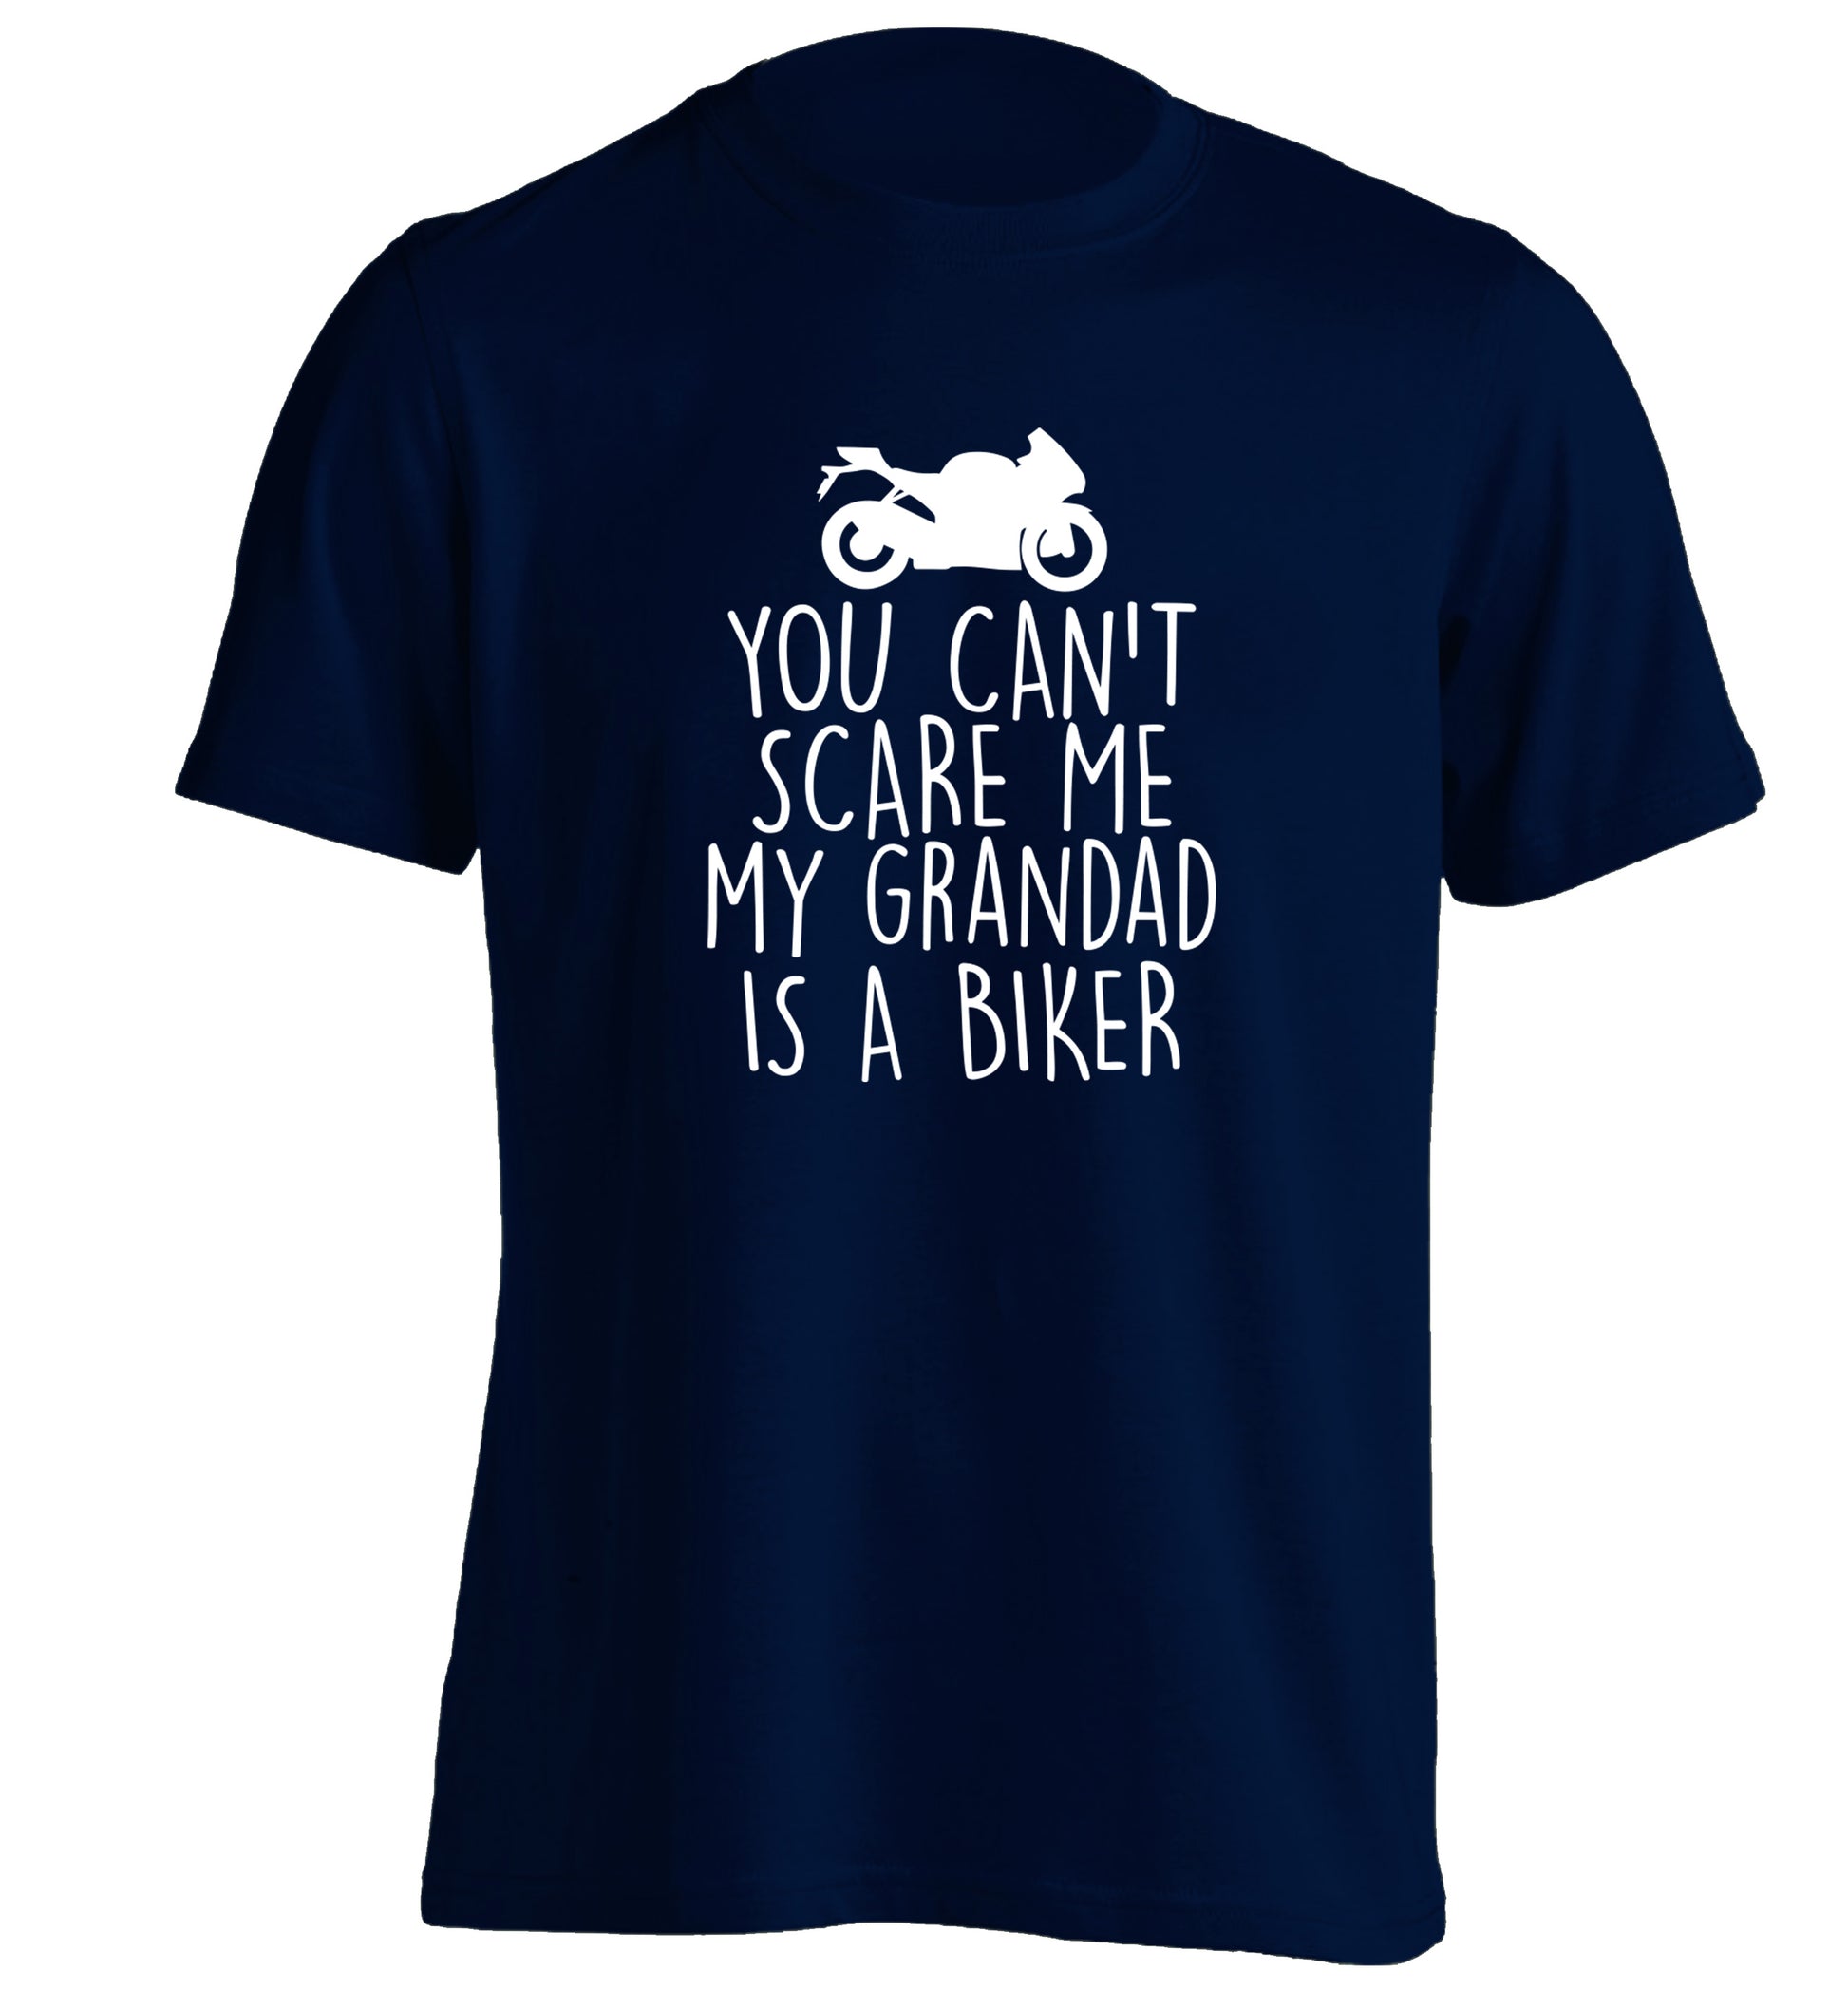 You can't scare me my grandad is a biker adults unisex navy Tshirt 2XL